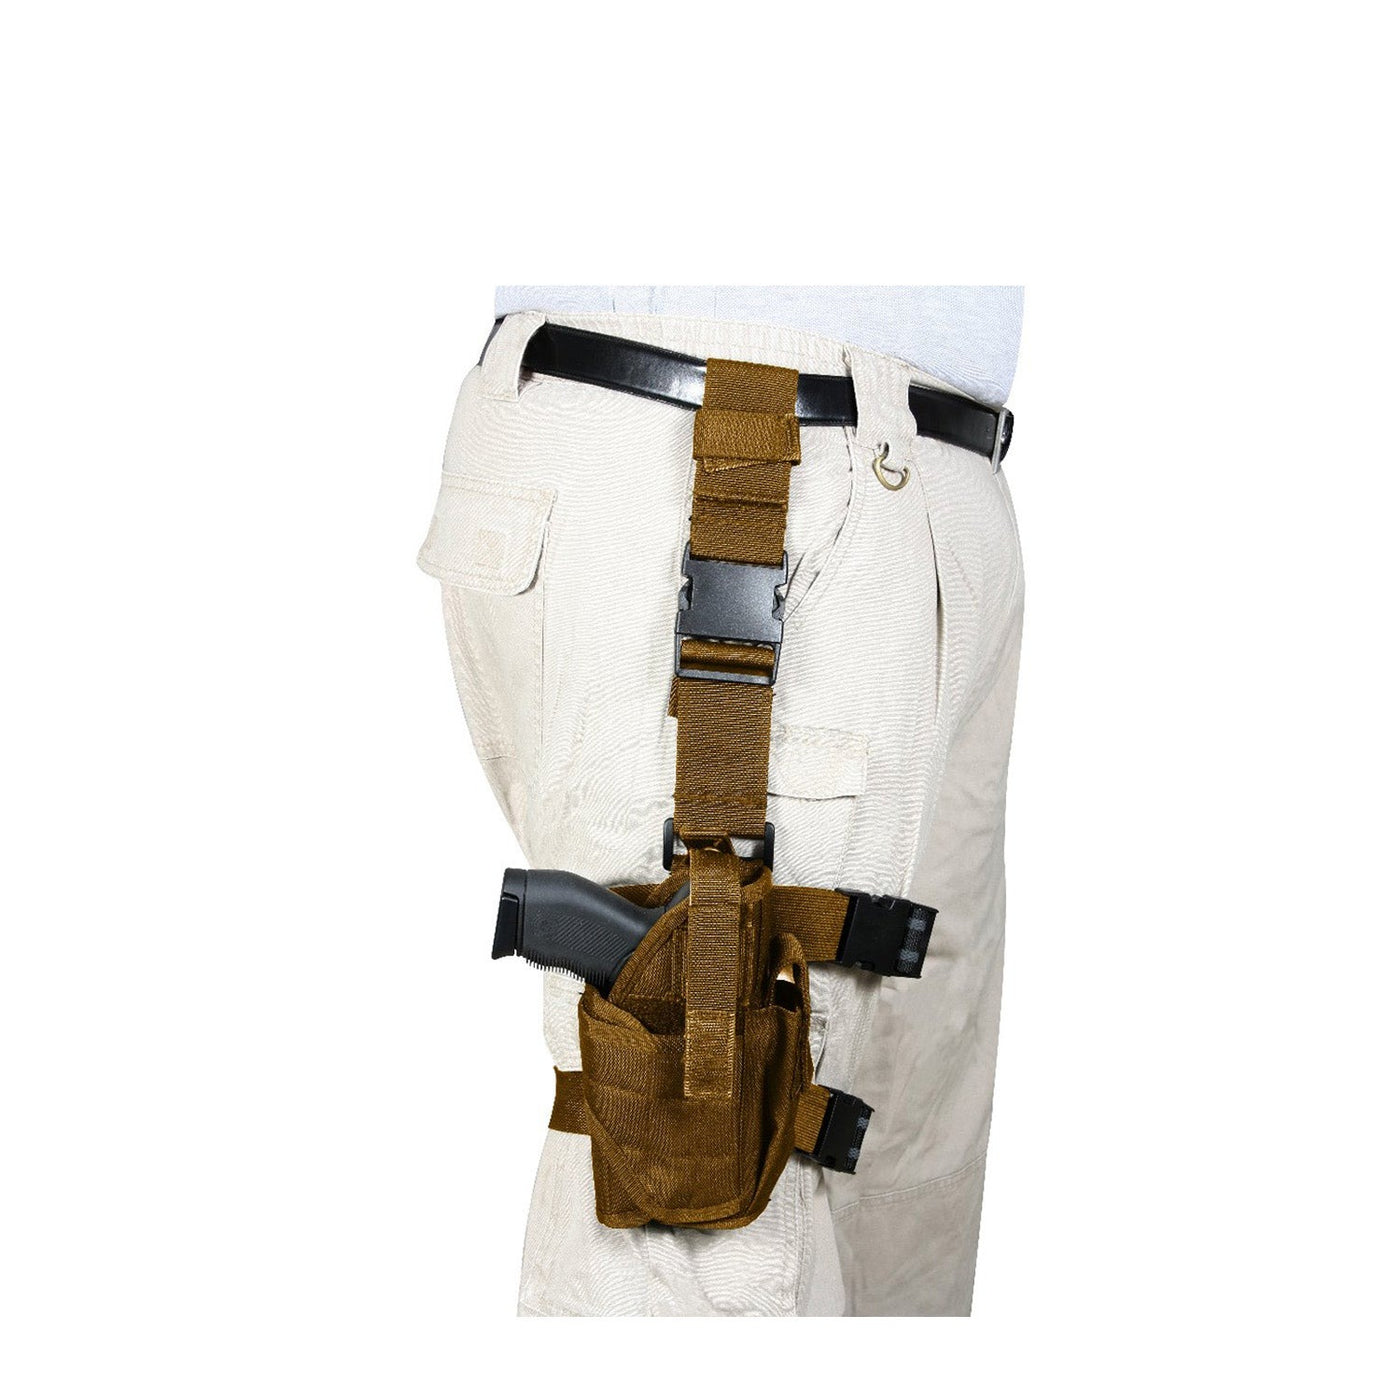 Monkey Depot - Holster: Hot Toys Mens Brown Leather-Like Drop Leg Holster  (Weathered)